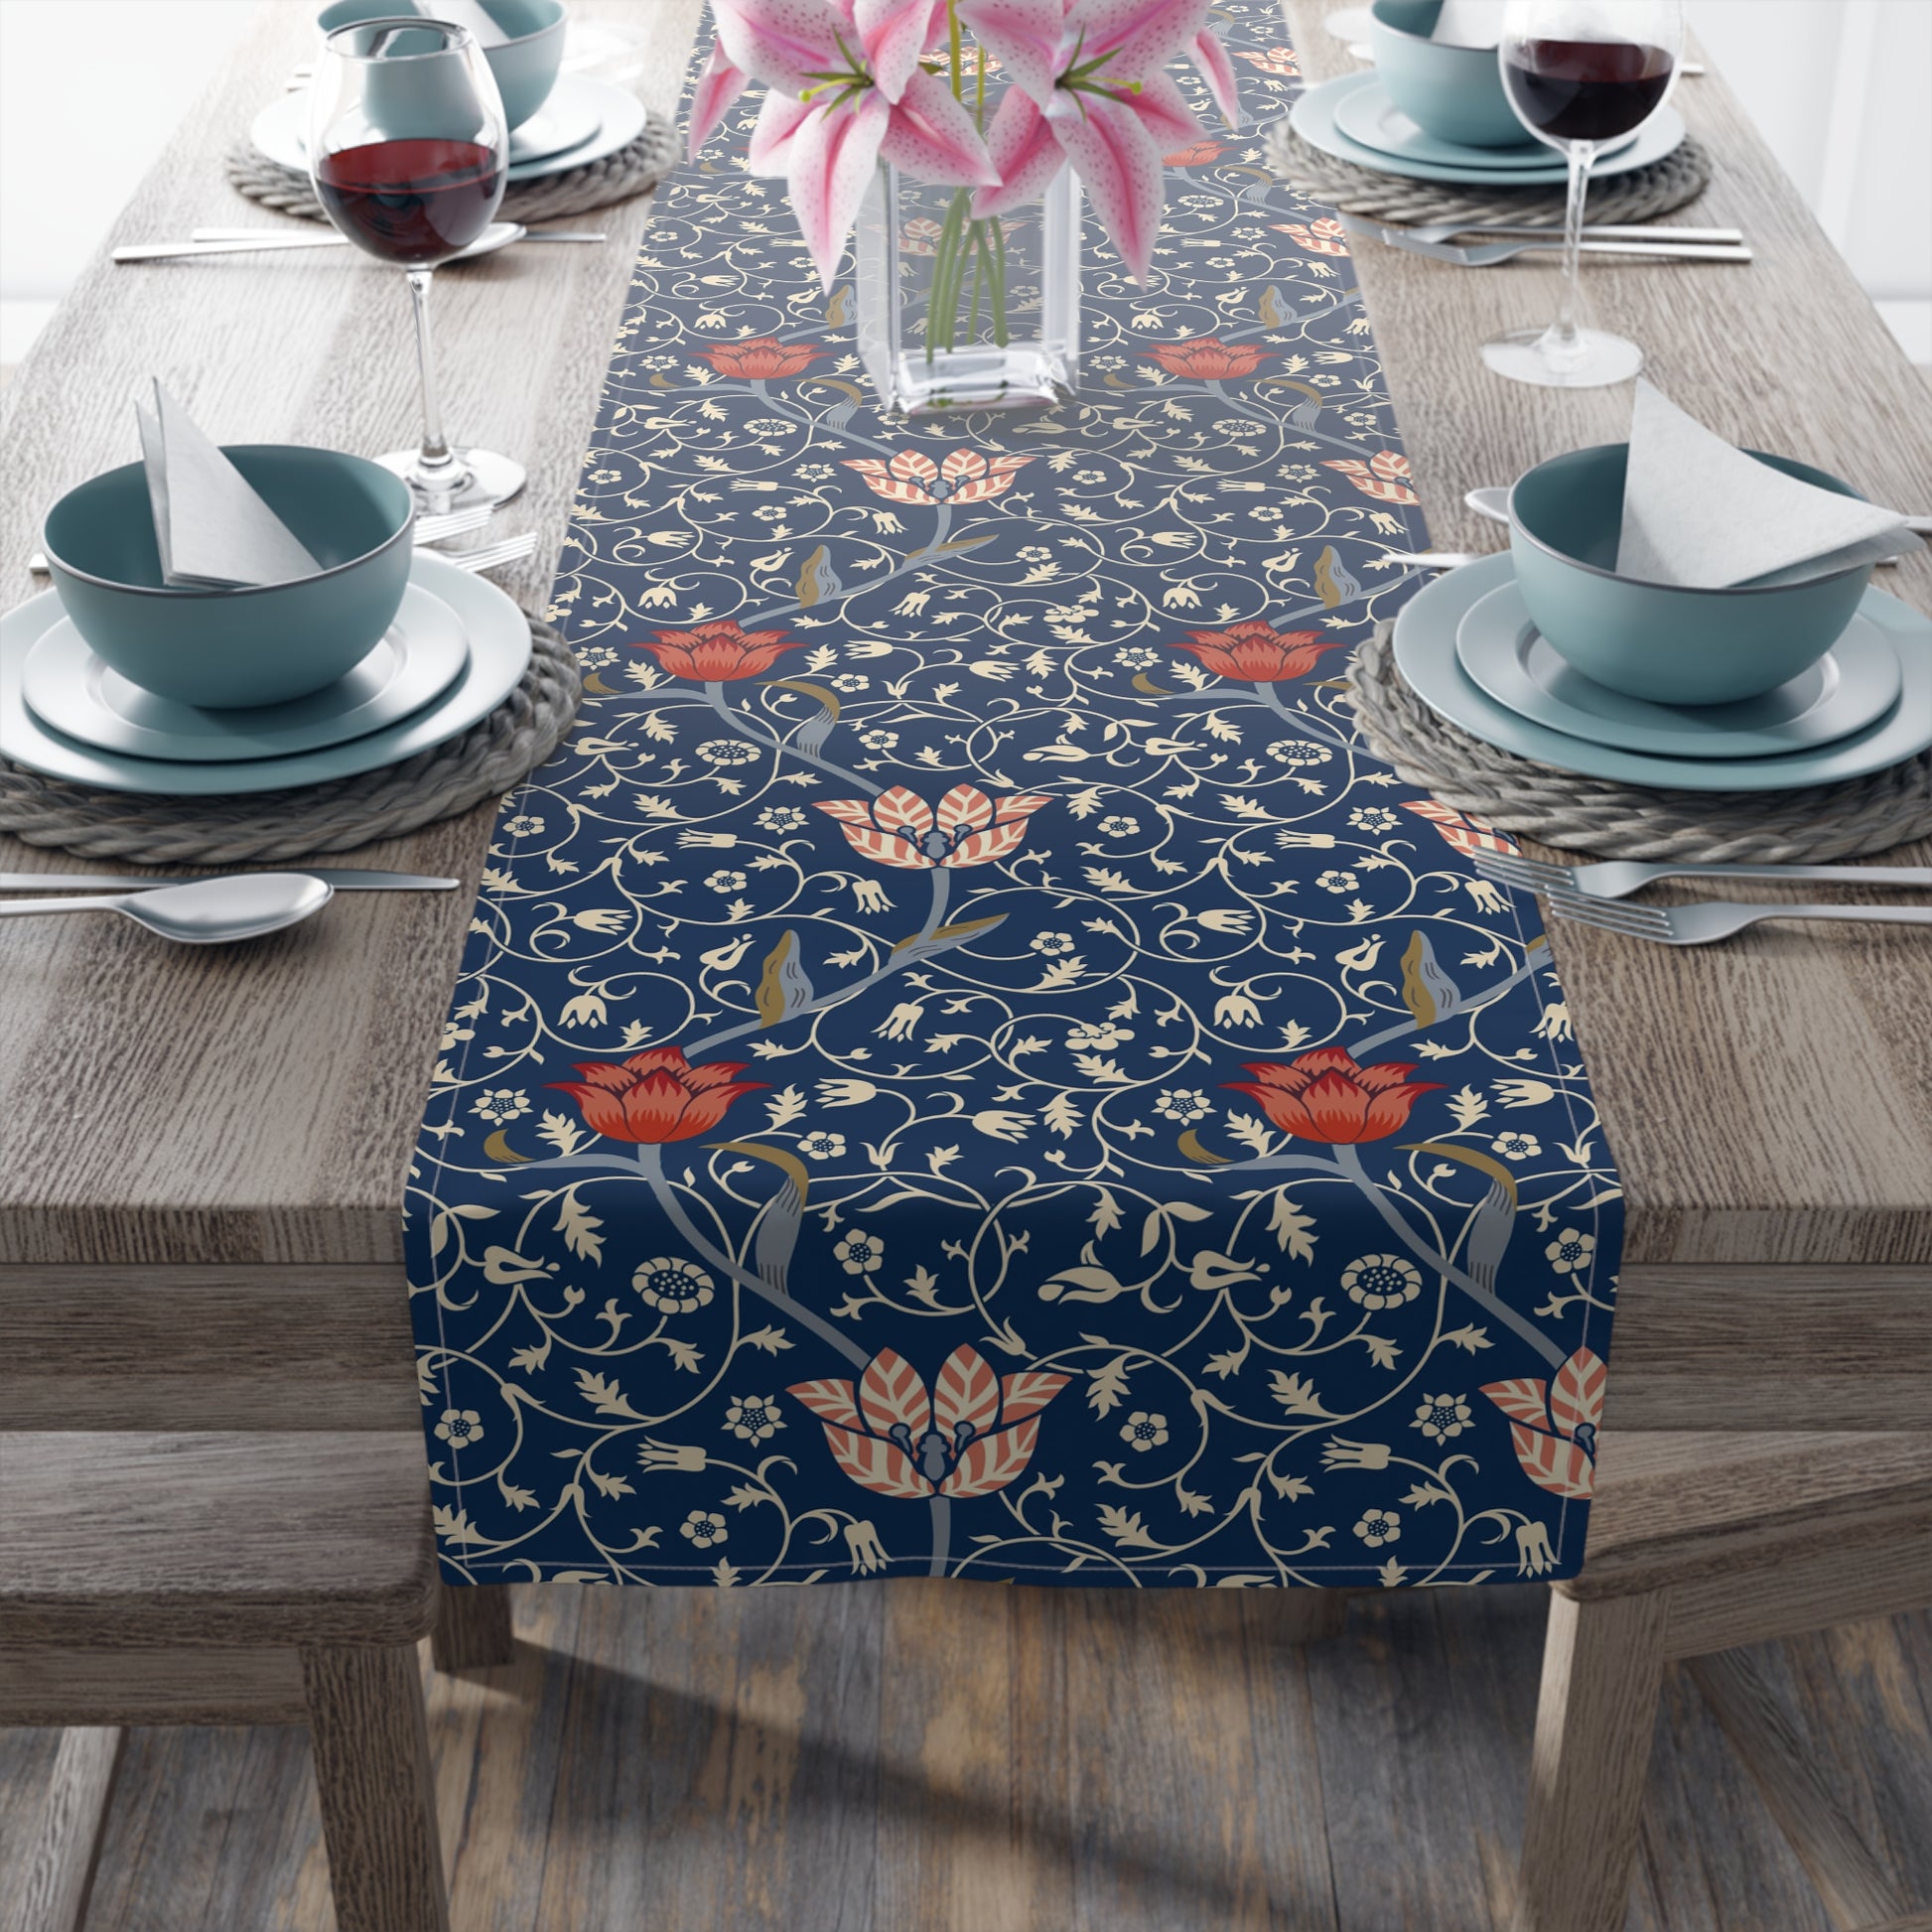 william-morris-co-table-runner-medway-collection-1